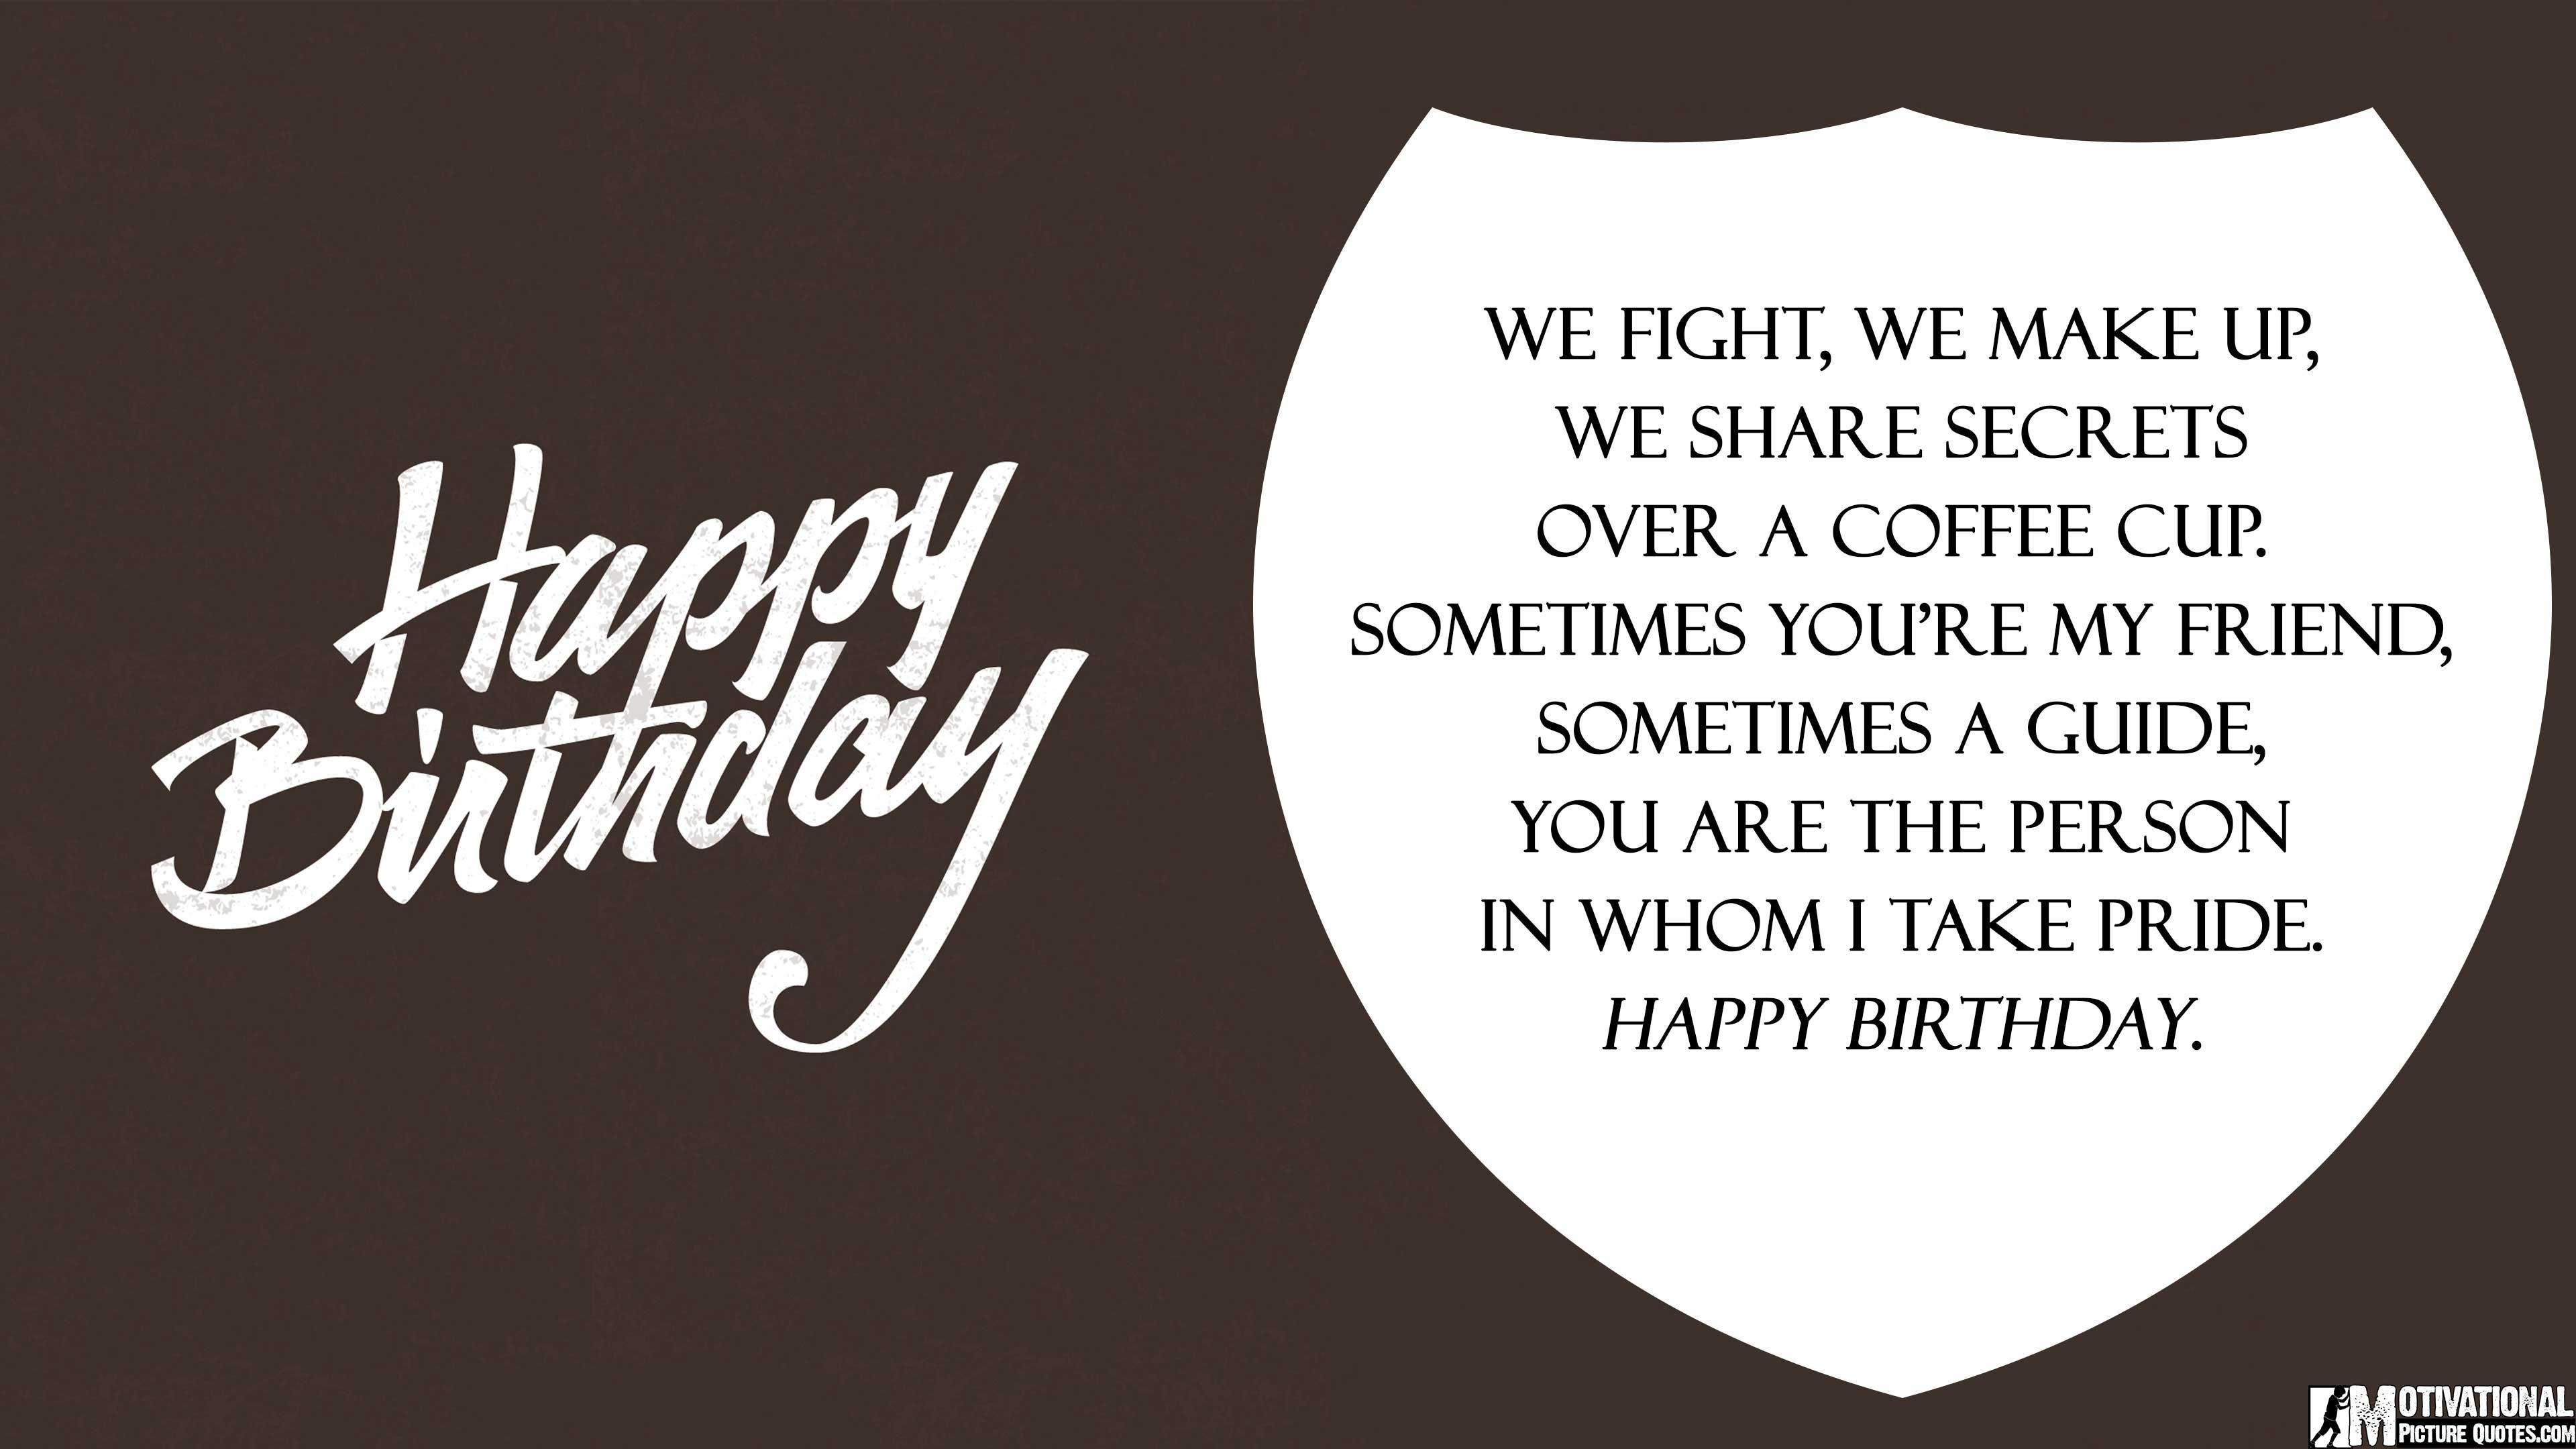 Happy Birthday Wallpaper With Quotes - Happy Birthday Inspirational Quotes  For Husband - 3840x2160 Wallpaper 